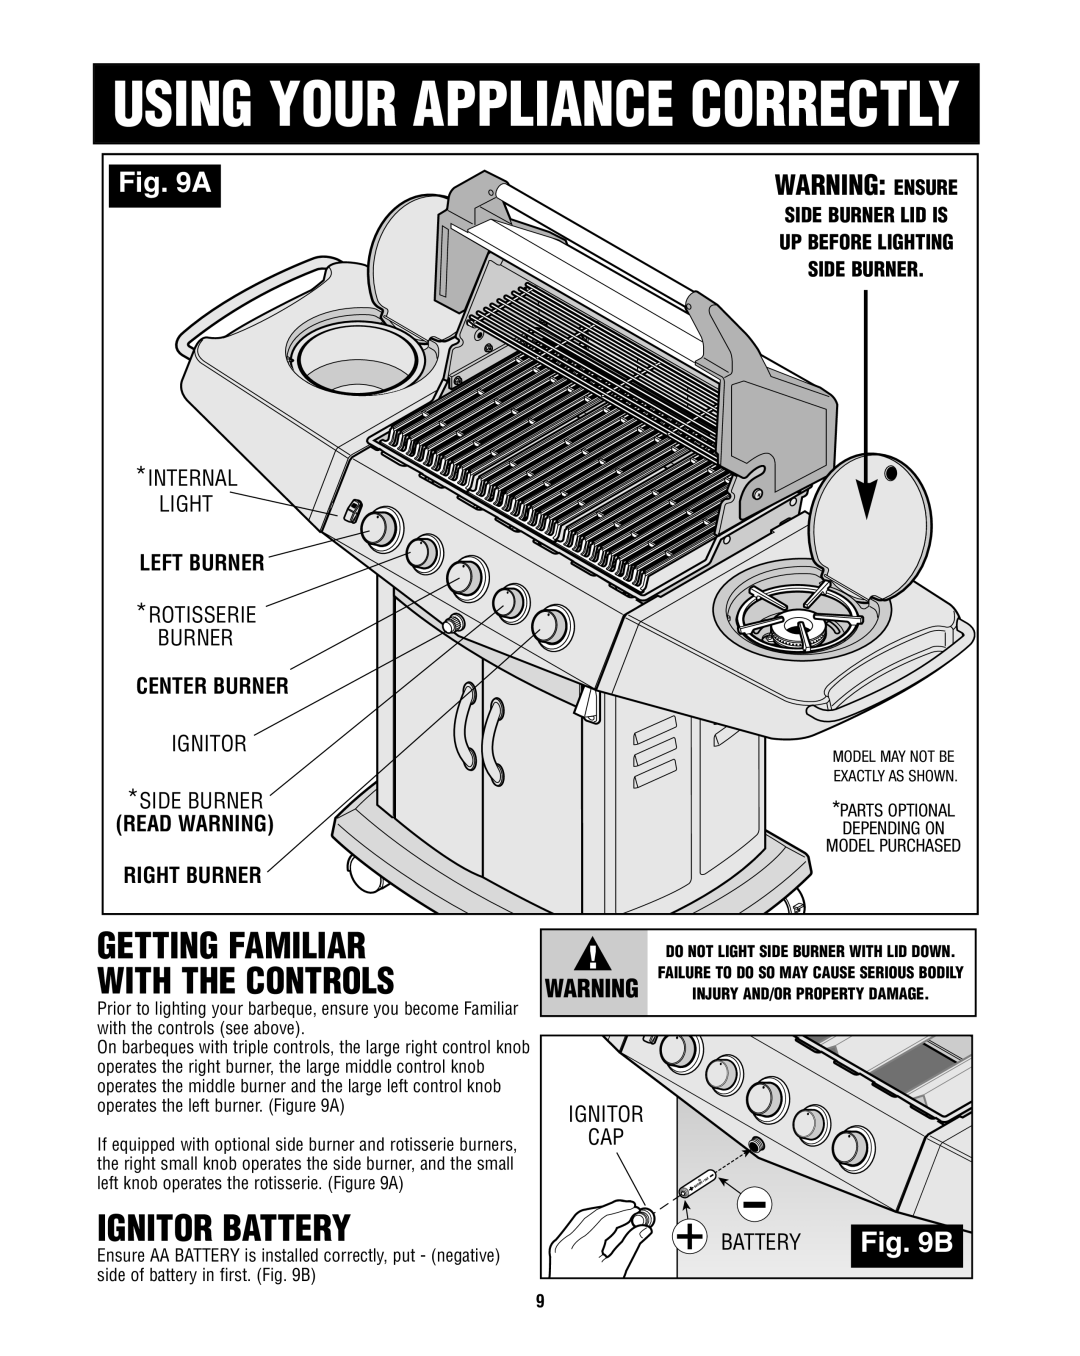 Fiesta FG50069 manual Getting Familiar With the Controls, Ignitor Battery 